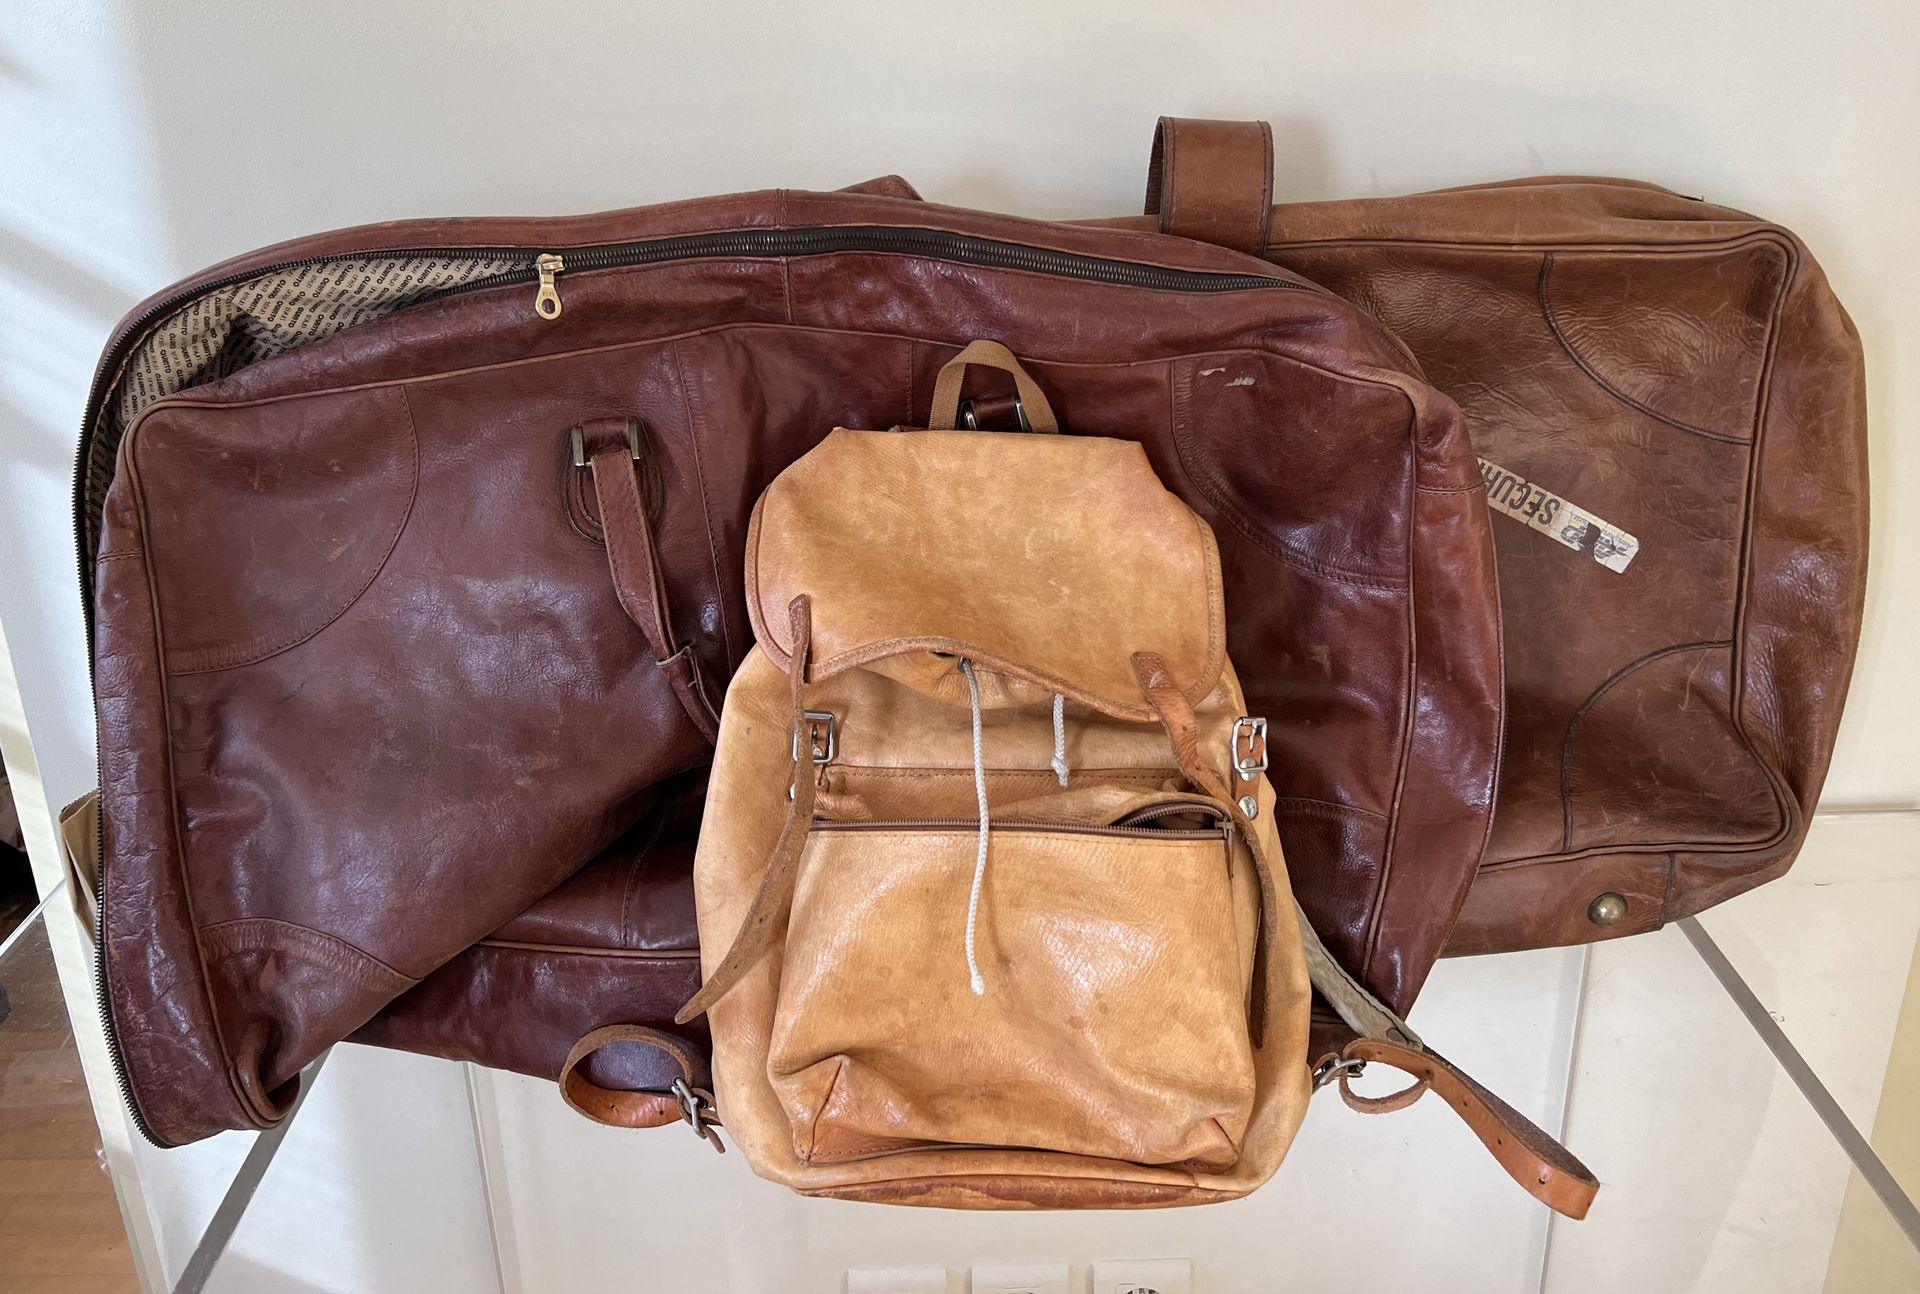 Null Two leather travel bags in used condition. A leather backpack is included.